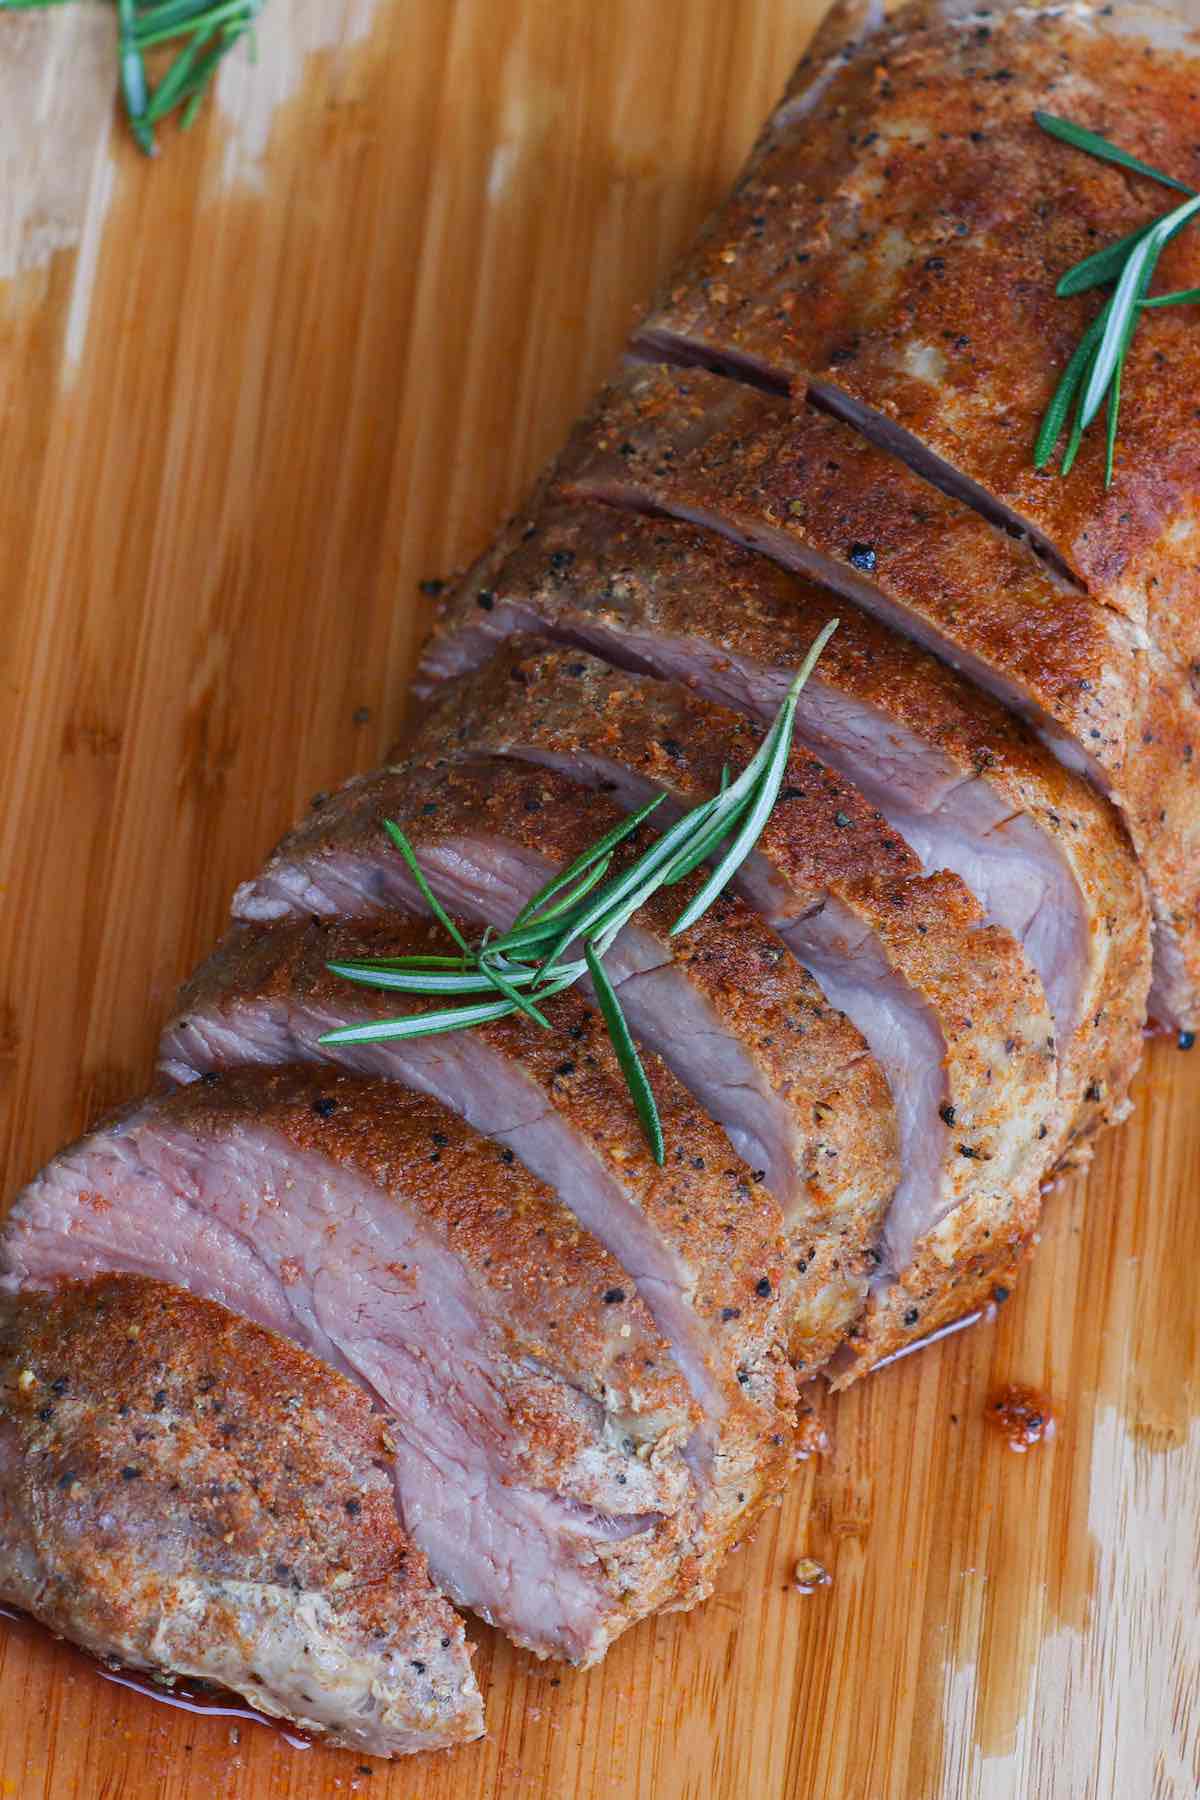 This Sous Vide Pork Loin is hands down the BEST way to cook pork loin roast, turning it to a perfectly tender and juicy dinner. The recipe is so easy – simply season, sous vide, and sear, for the most delicious and flavorful pork loin! Guaranteed results EVERY TIME!  #SousVidePorkLoin #SousVidePorkLoinRoast